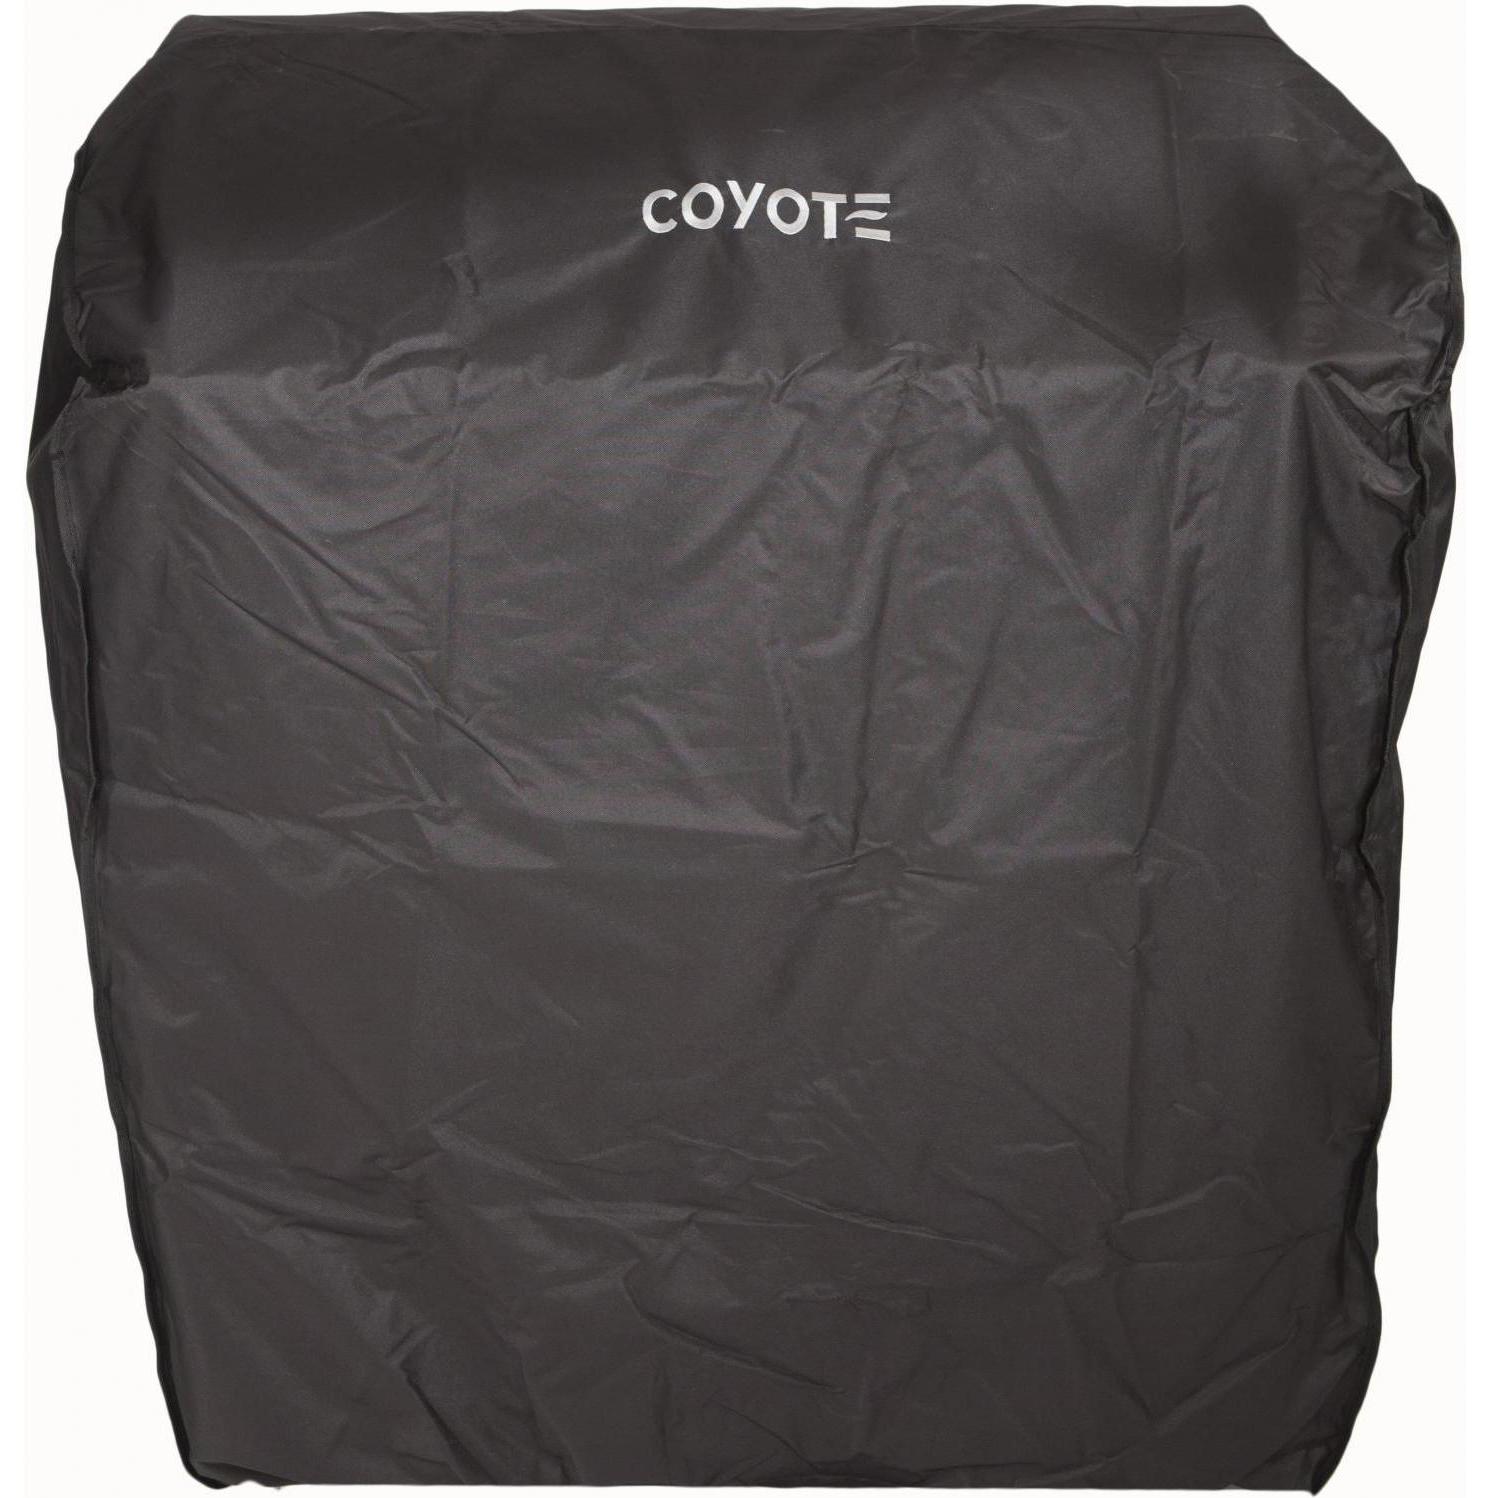 Coyote Outdoor Living 50” Grill Cover-Black